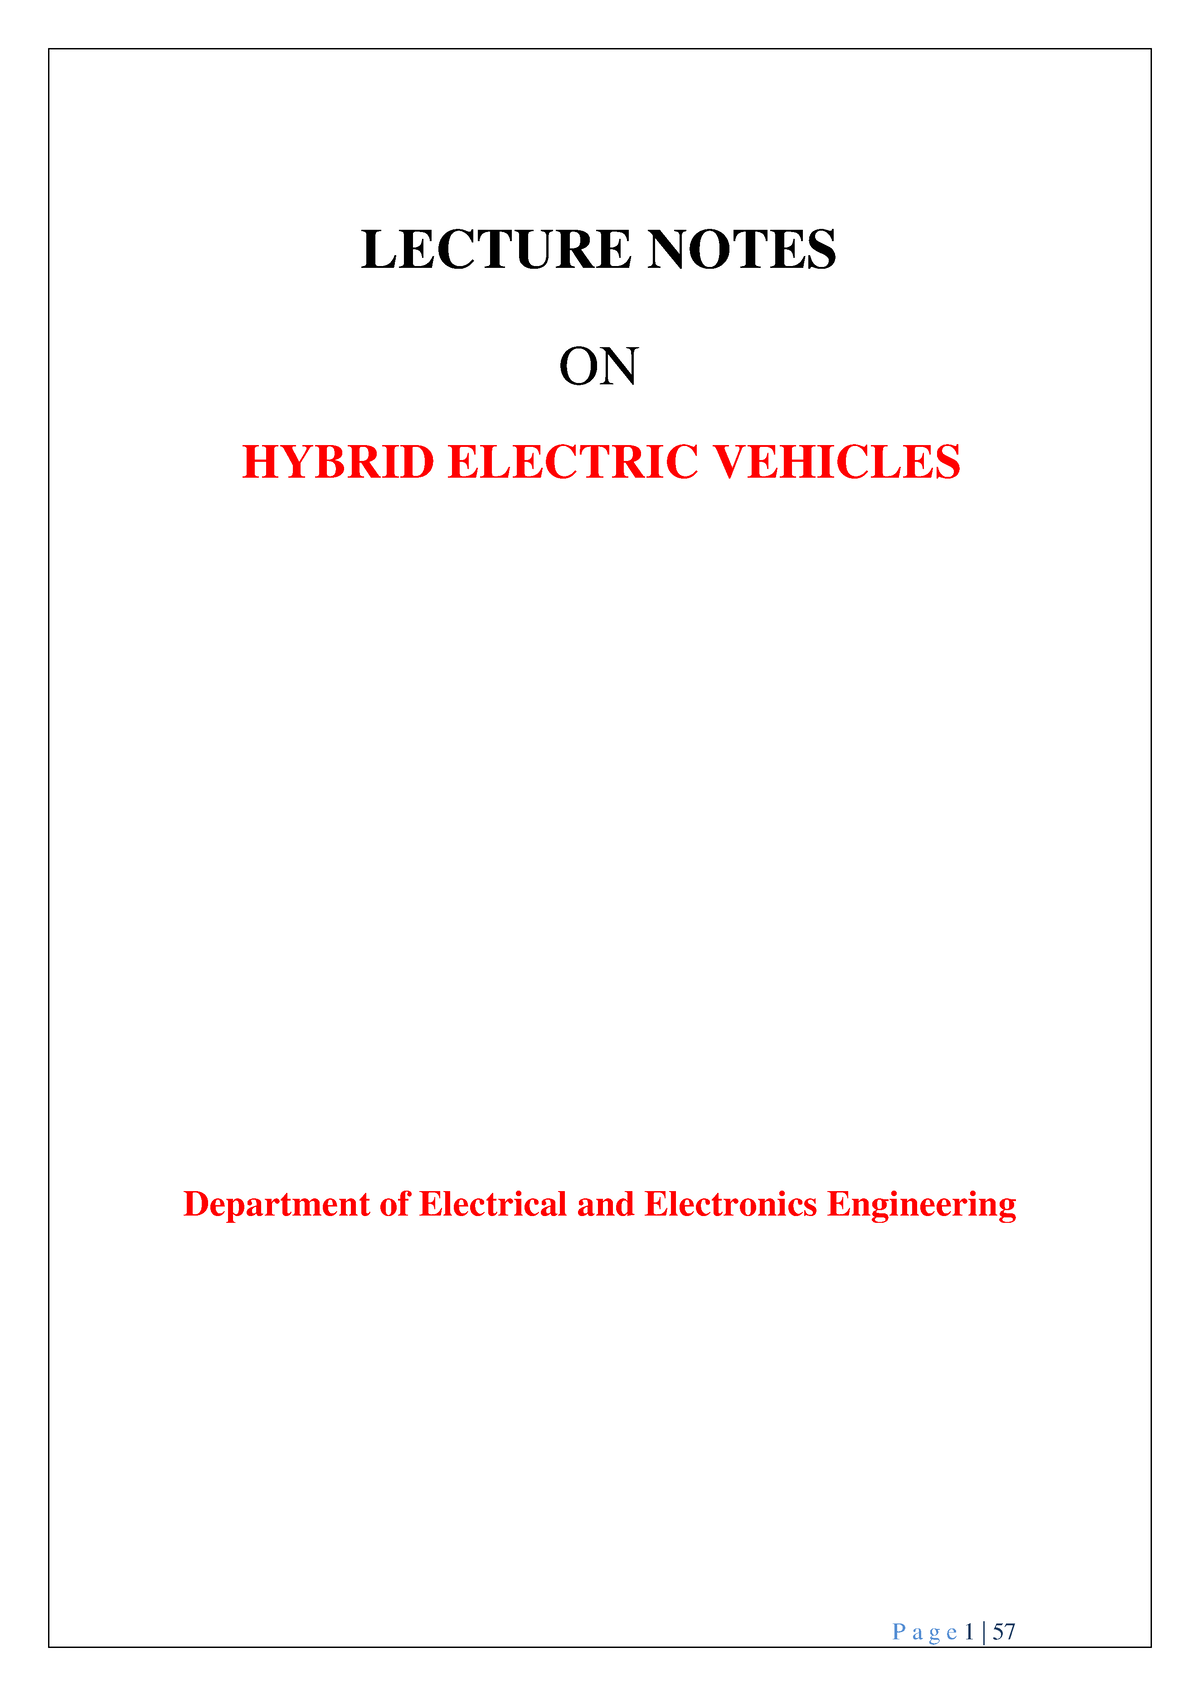 HEV notes pdf (1) LECTURE NOTES ON HYBRID ELECTRIC VEHICLES 2019